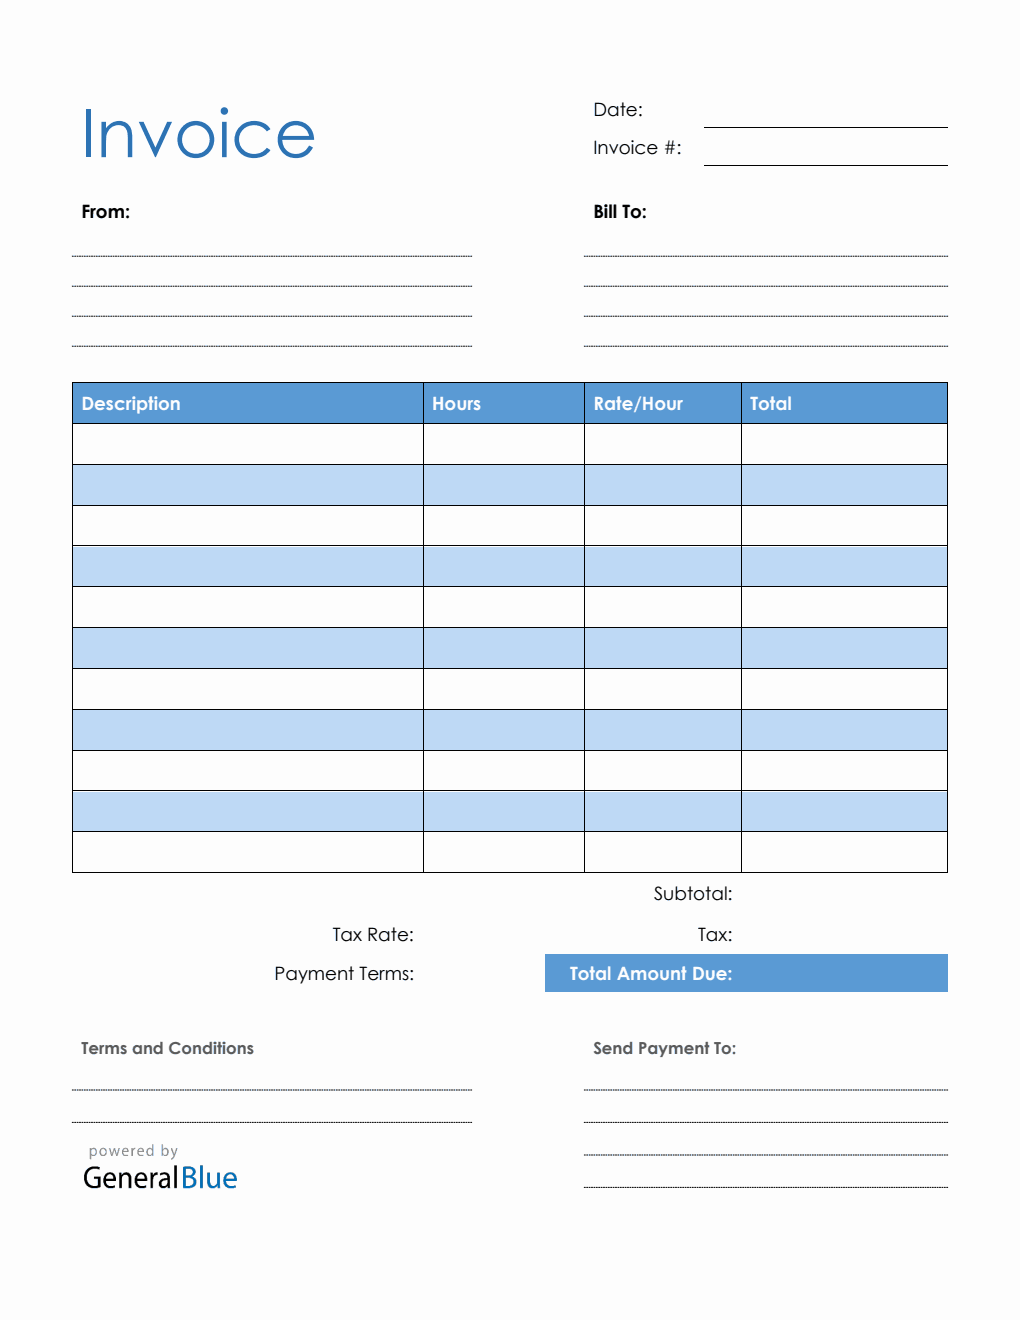 Blank Invoice Template in PDF Blue Within Image Of Invoice Template